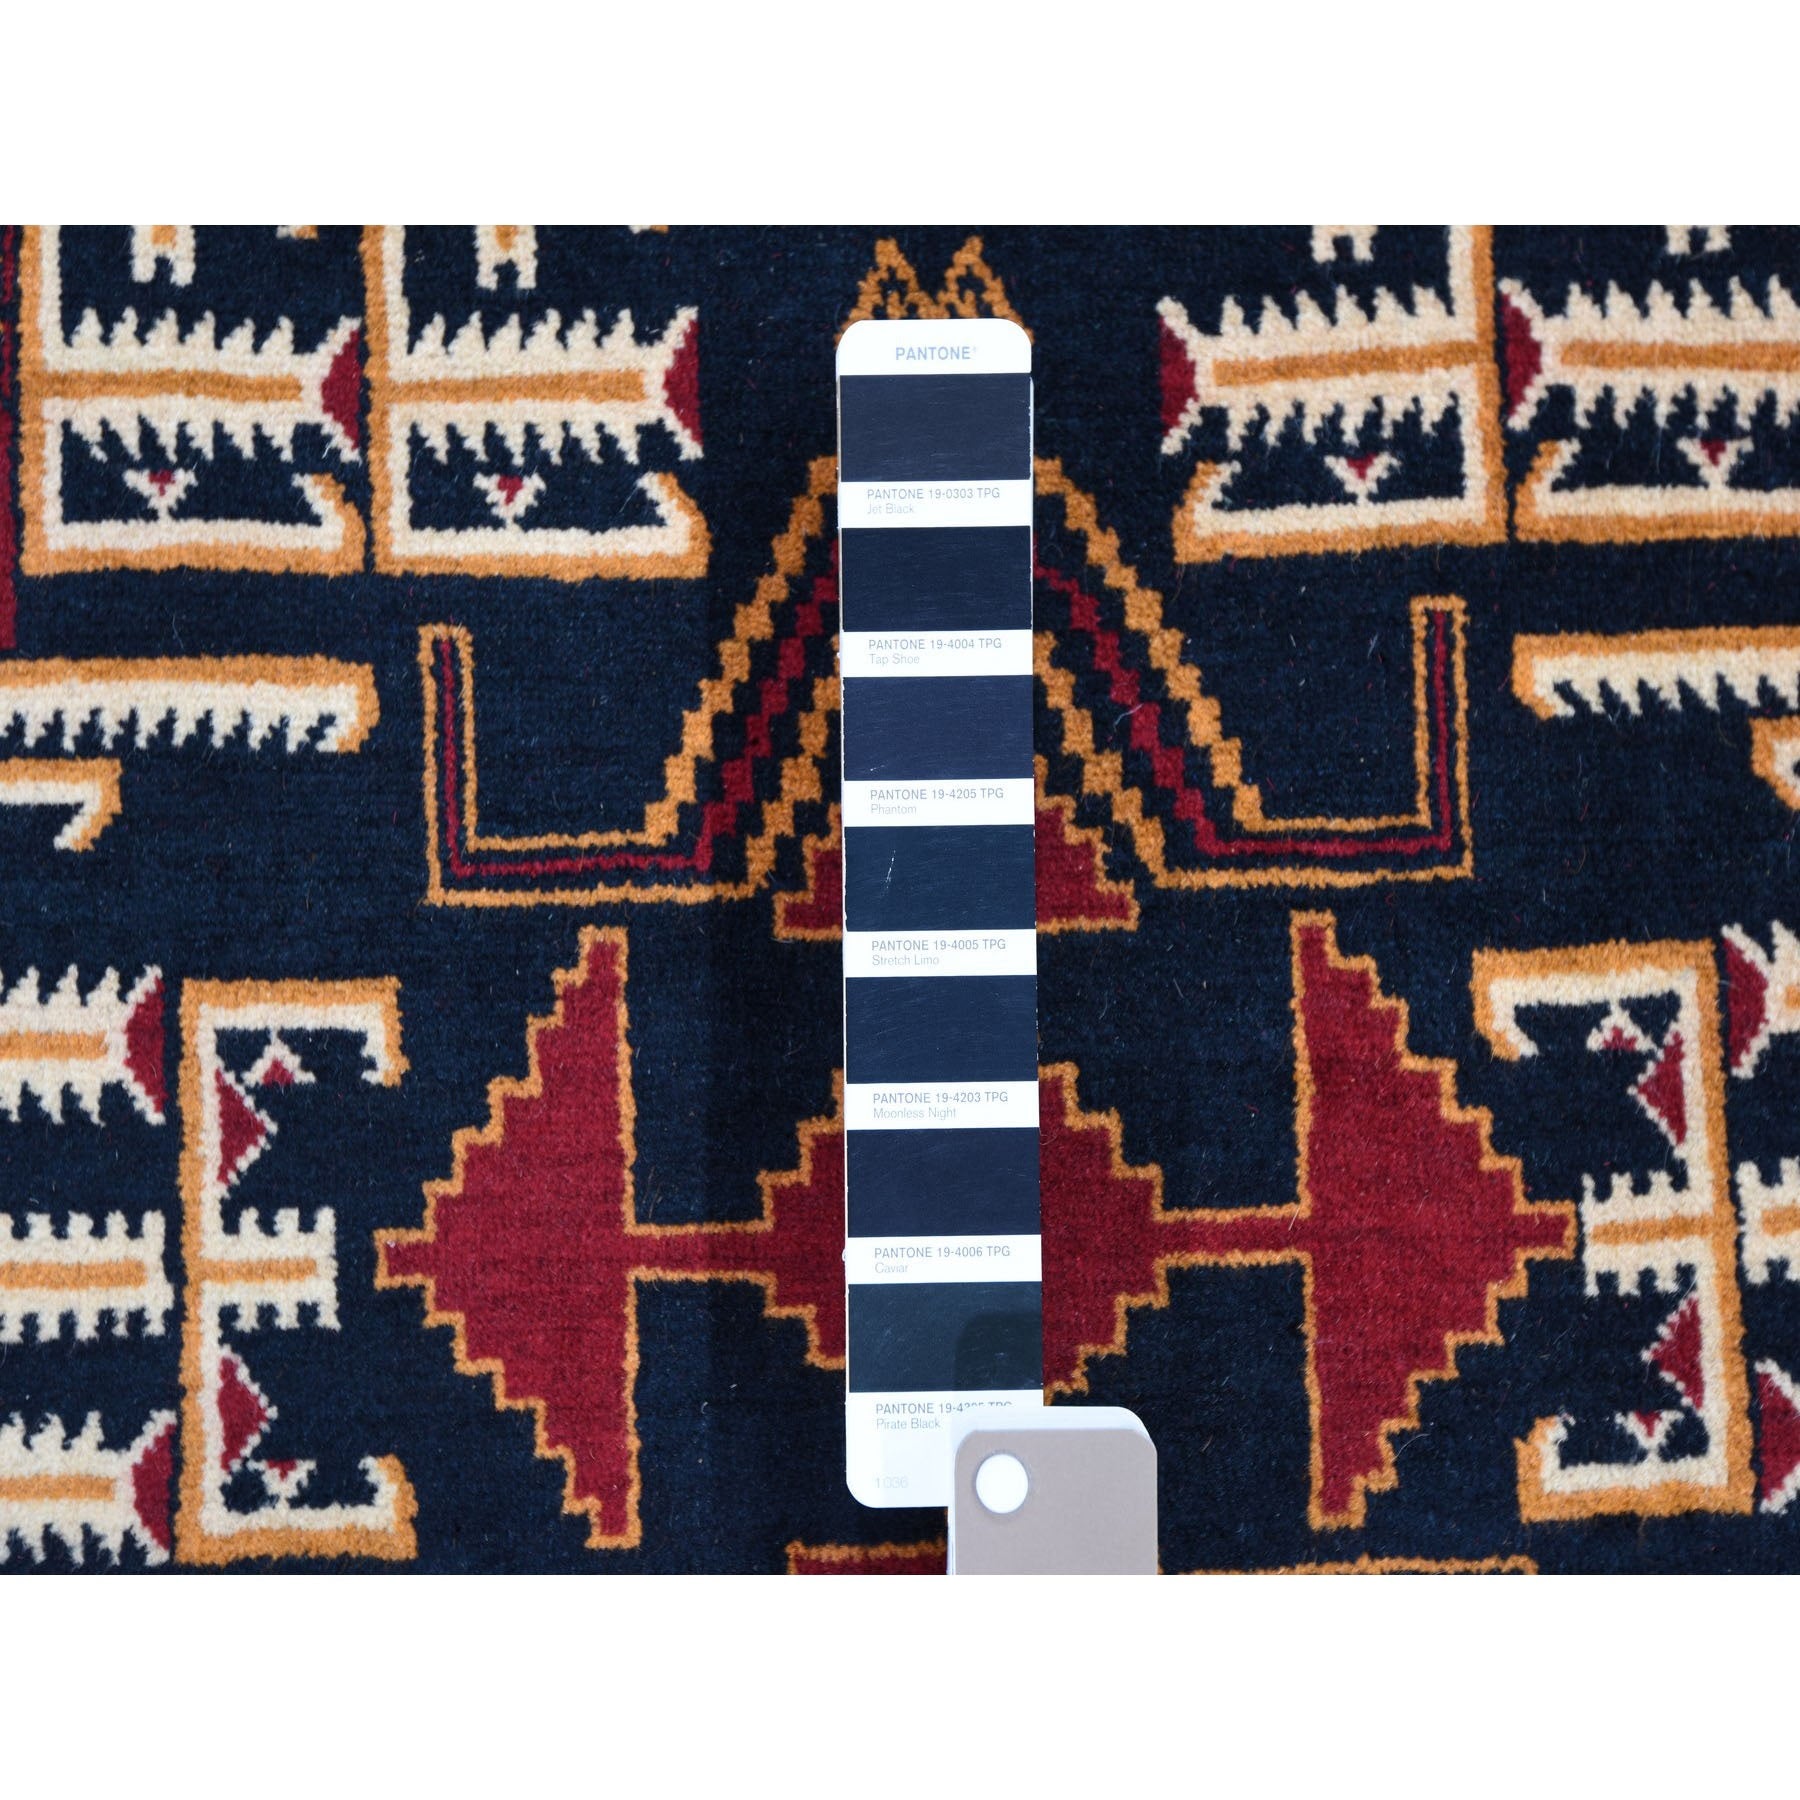 Hand Knotted Tribal Area Rug > Design# CCSR49729 > Size: 3'-6" x 6'-4"